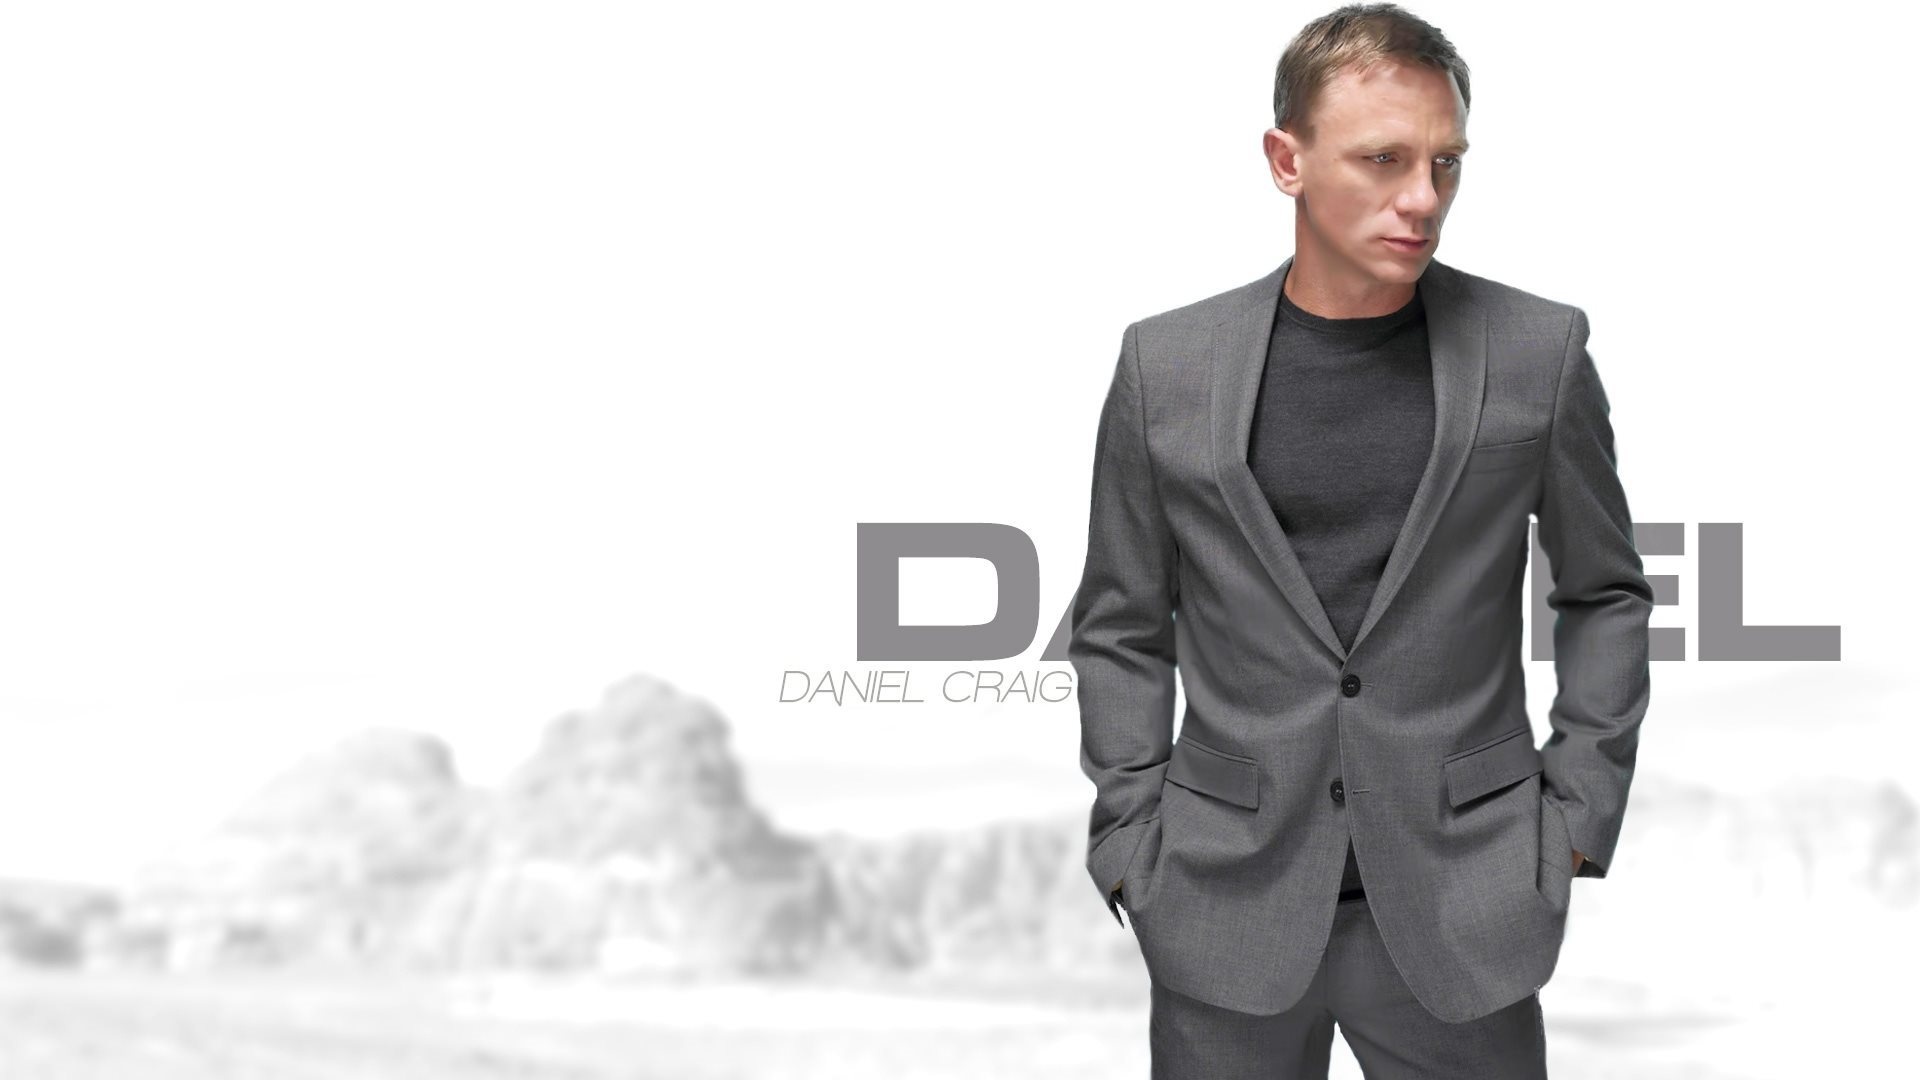 Daniel Craig: Hollywood's celebrity, Named the “Best Dressed Male” by Esquire Magazine in 2006. 1920x1080 Full HD Background.